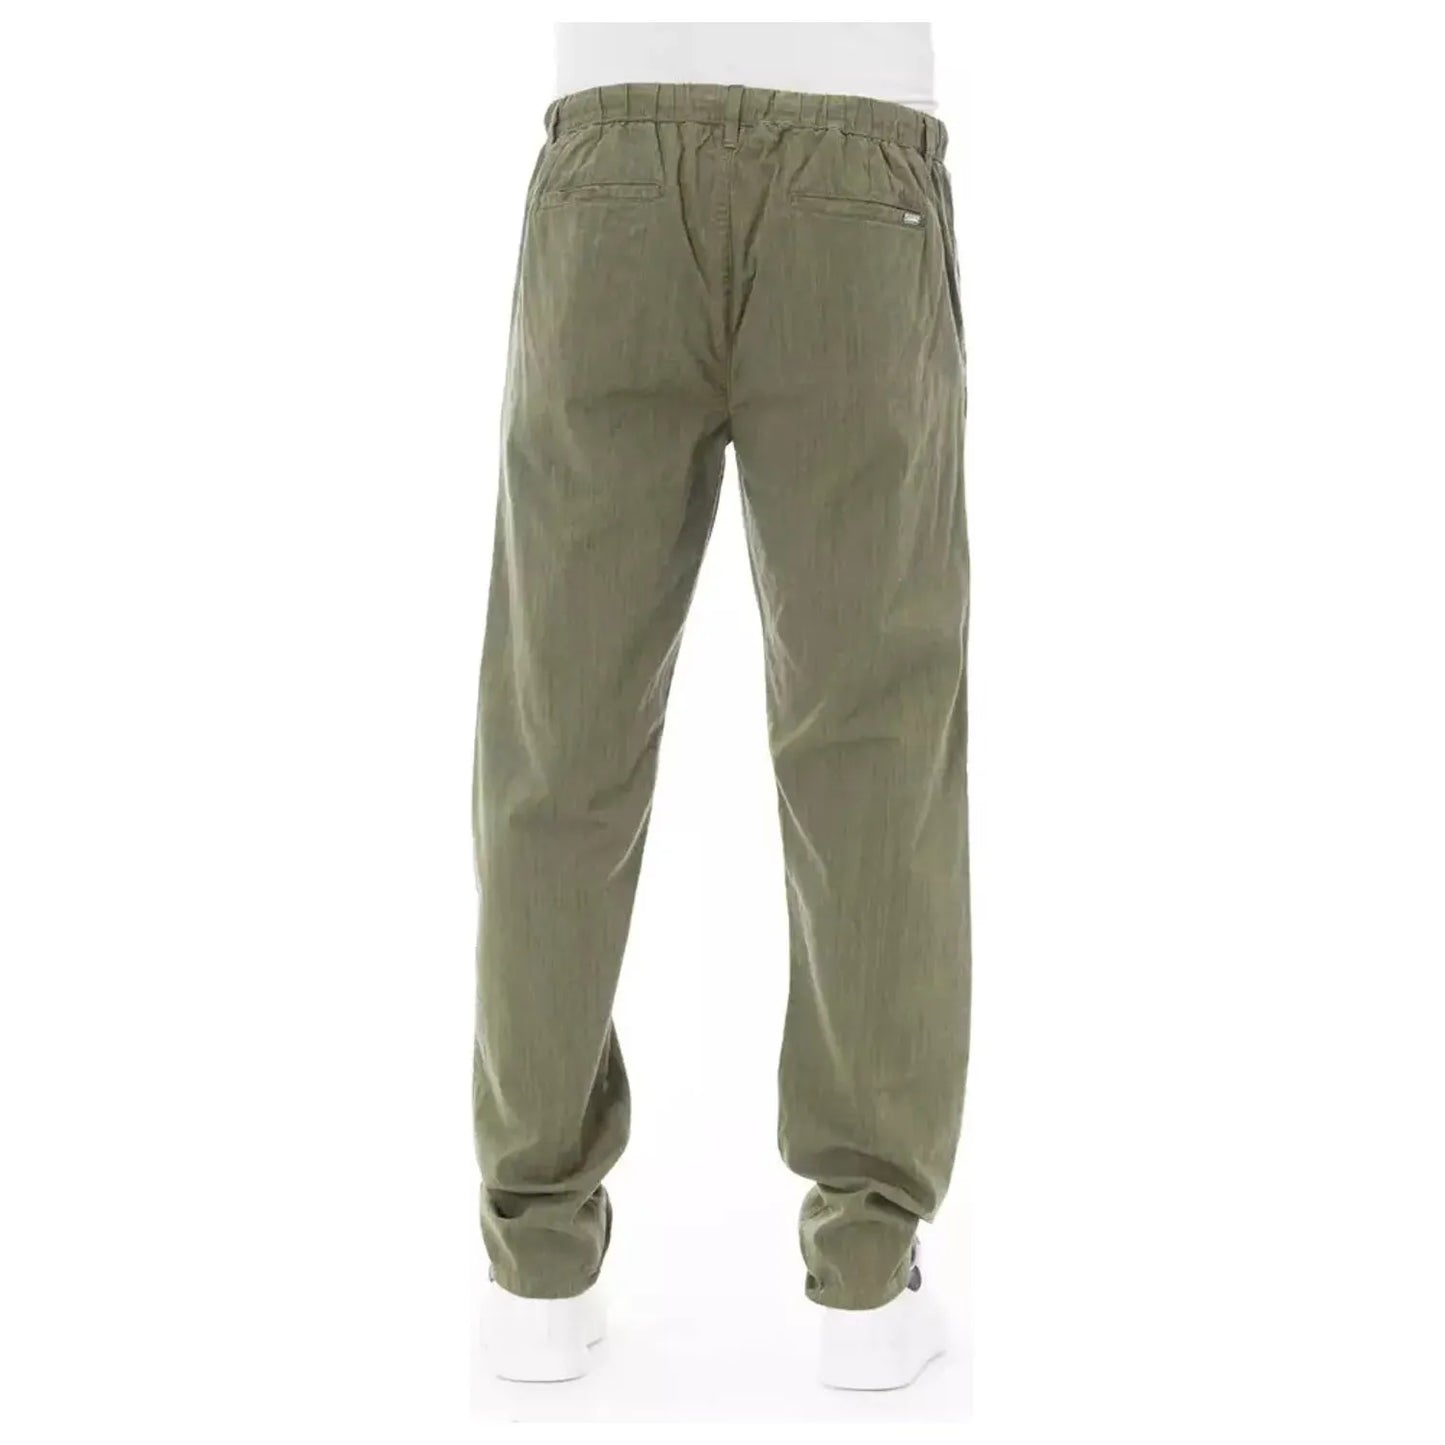 Baldinini Trend Elegant Cotton Chino Trousers in Army Green army-cotton-jeans-pant-2 product-23136-2042170543-20-7eda6105-57a.webp